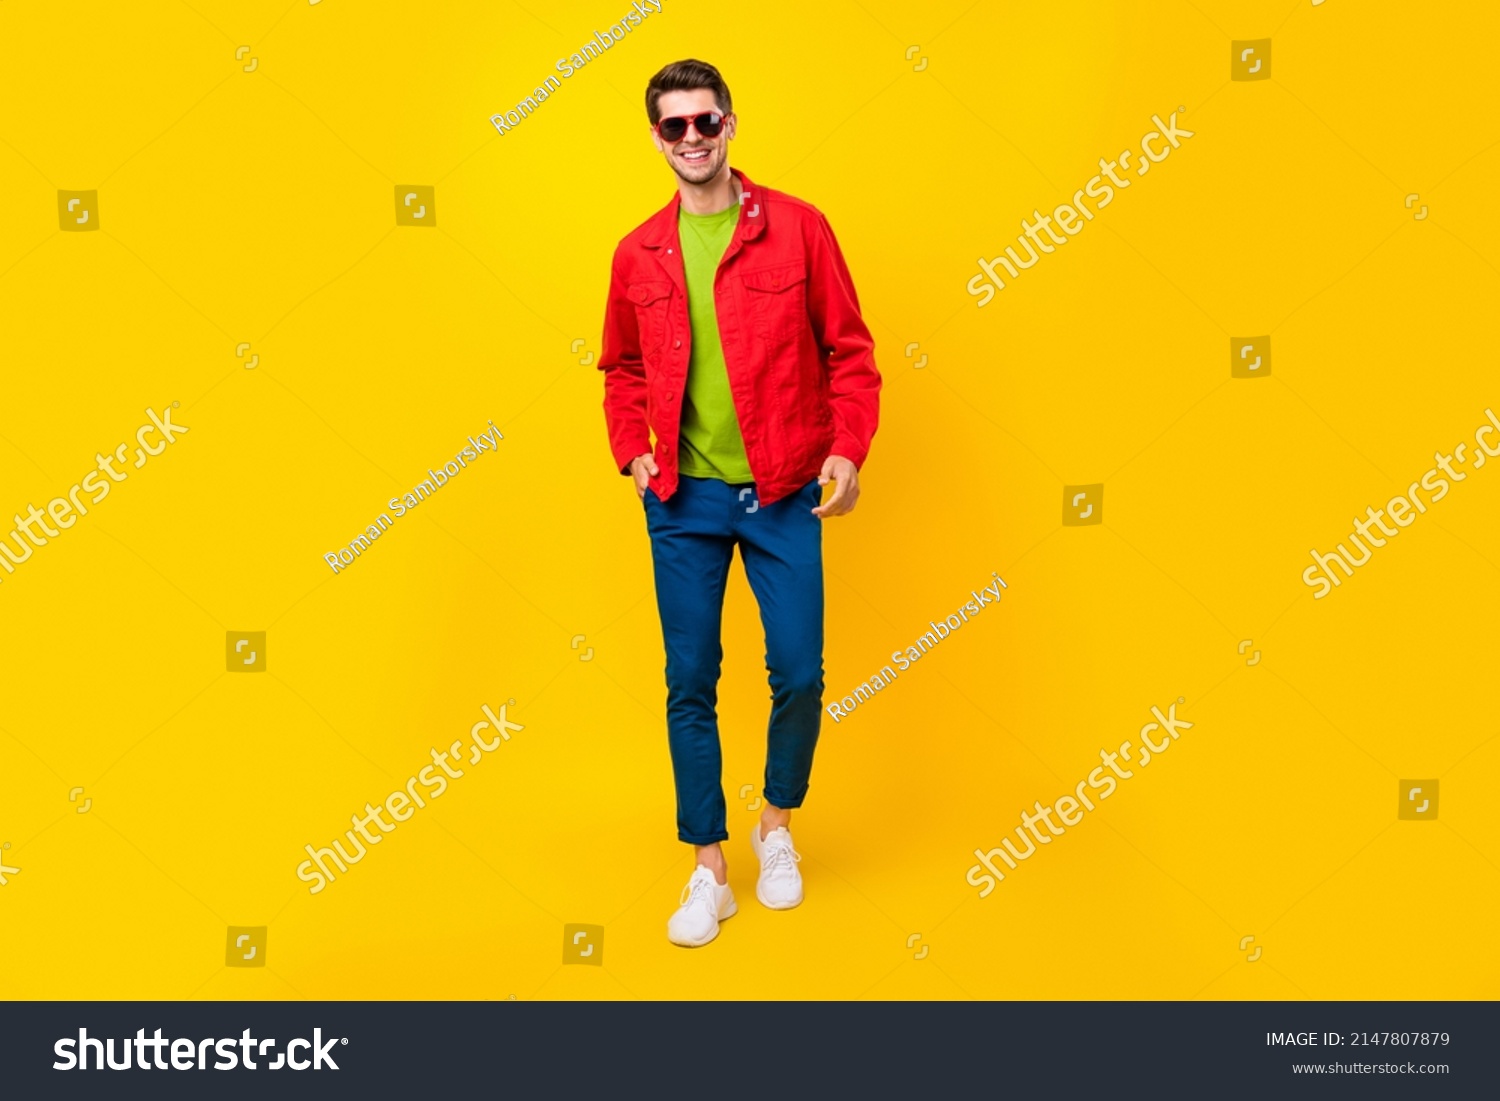 Full Length Body Size View Attractive Stock Photo 2147807879 | Shutterstock